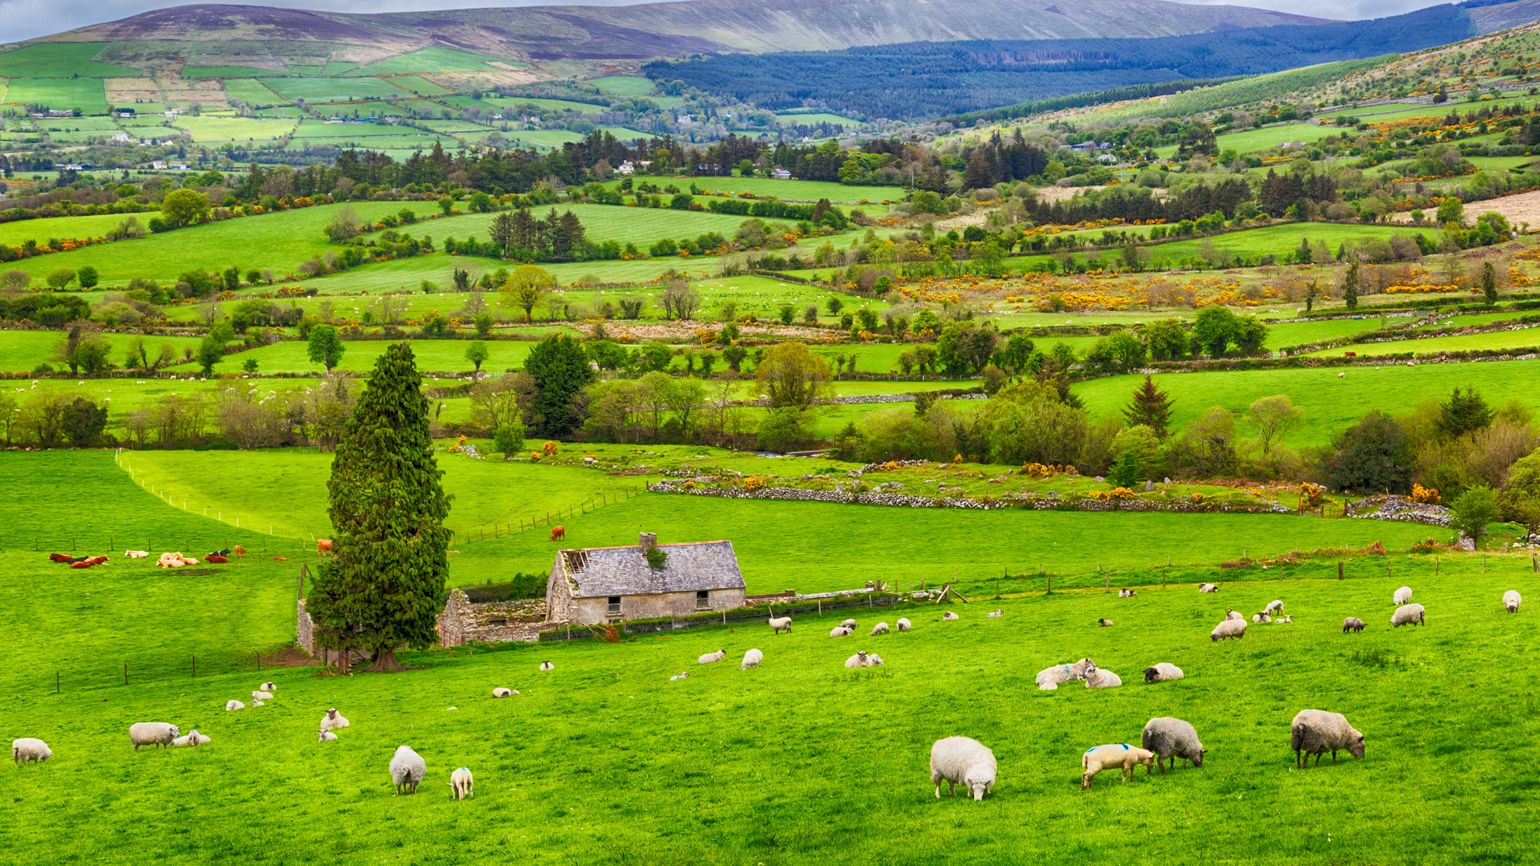 Green pasture scene with sheep in Ireland